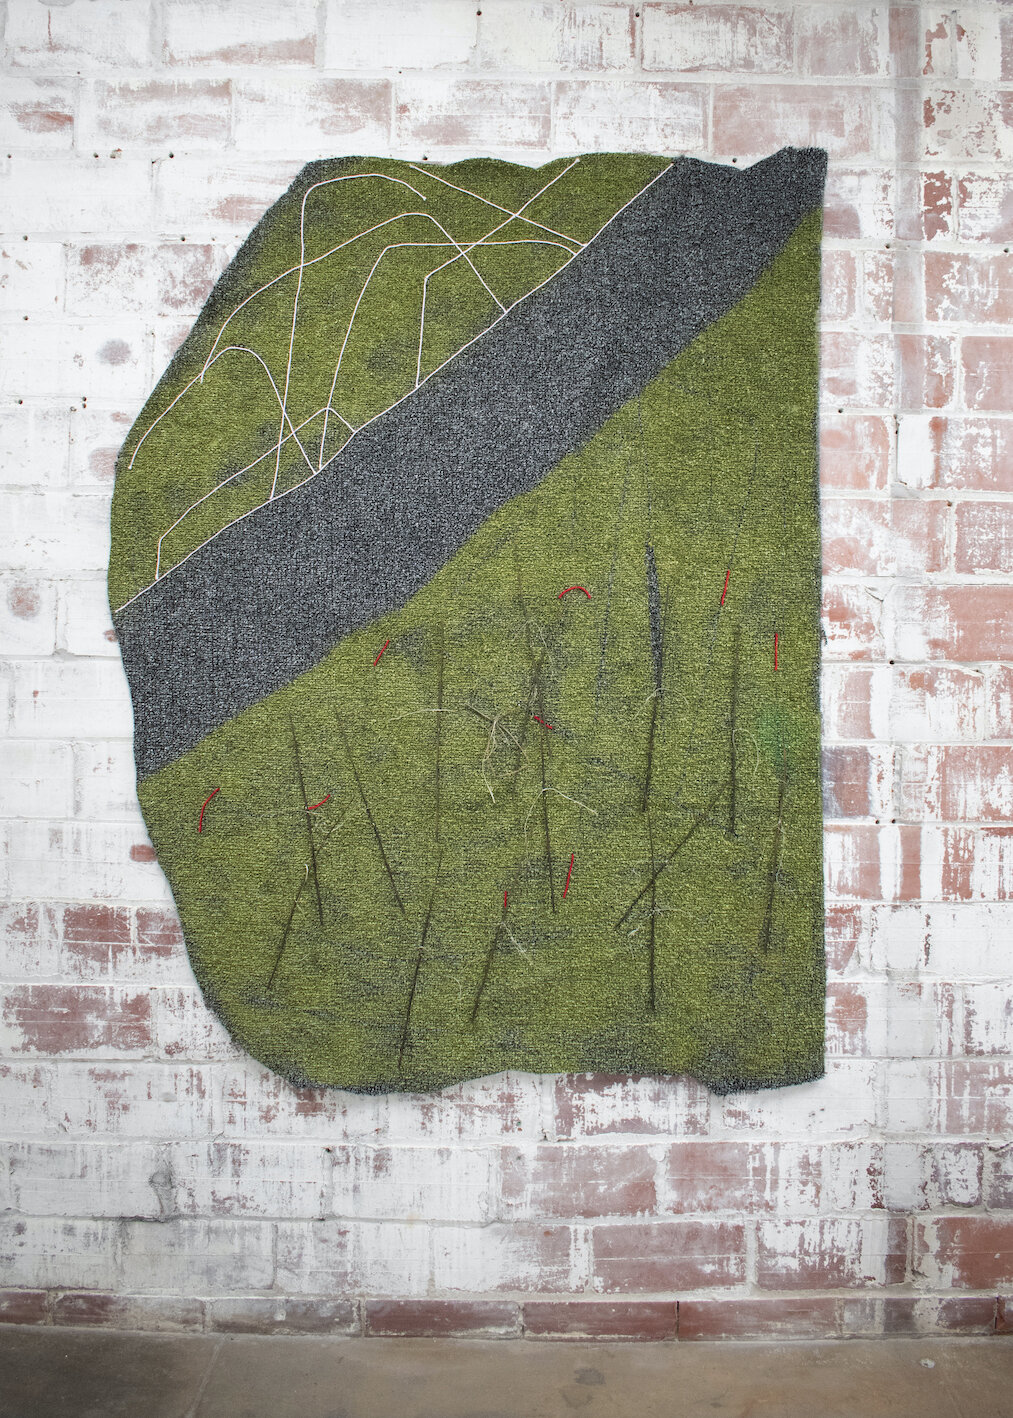  Teresa Baker,  Forest , 2019, Willow, Yarn, Spray Paint and Buffalo Sinew on AstroTurf, 64 x 51 inches 